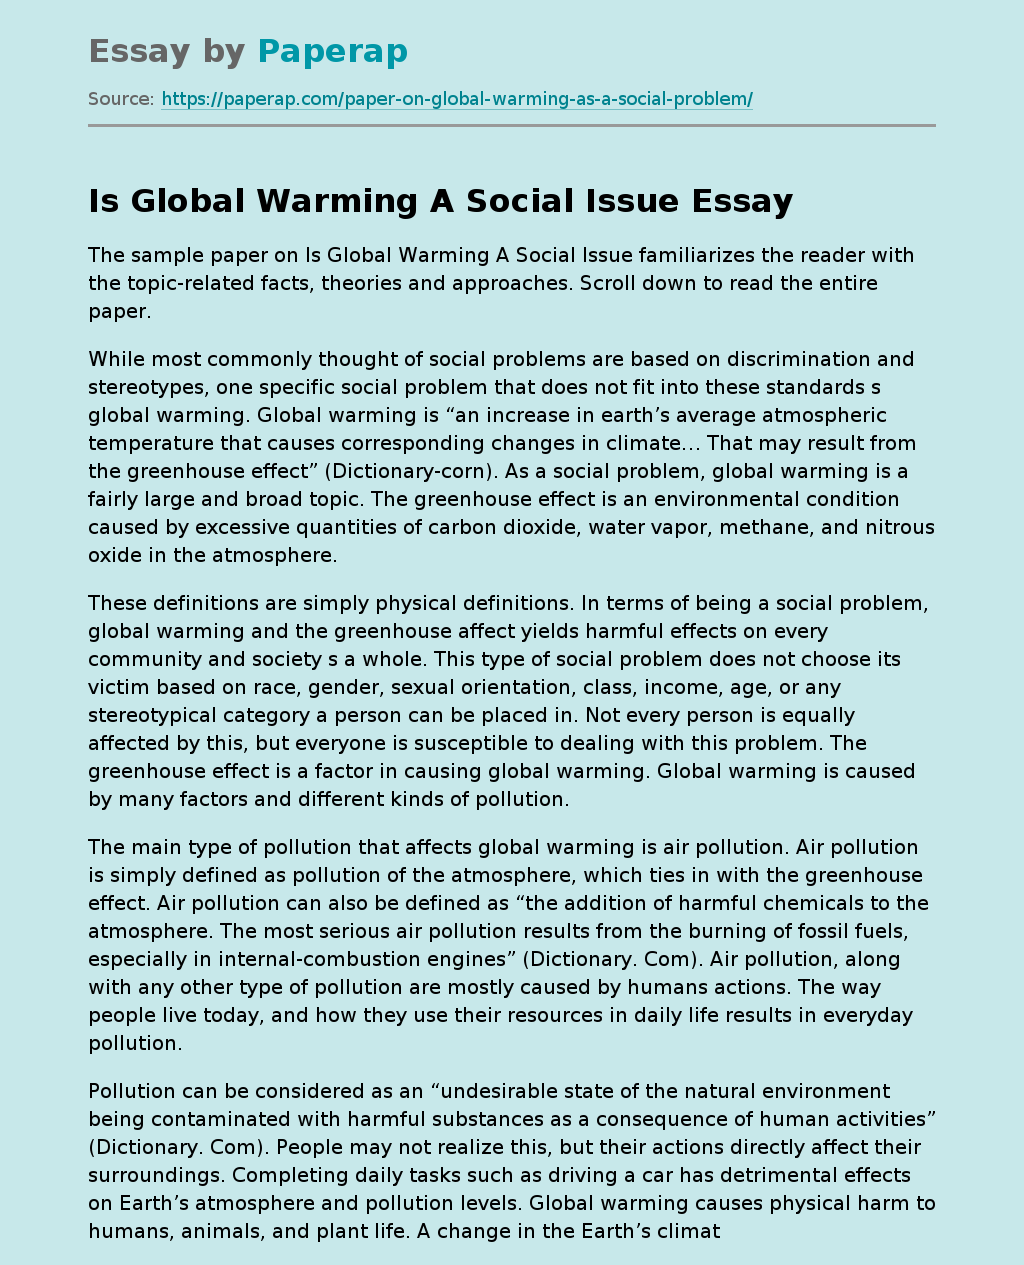 Is Global Warming A Social Issue